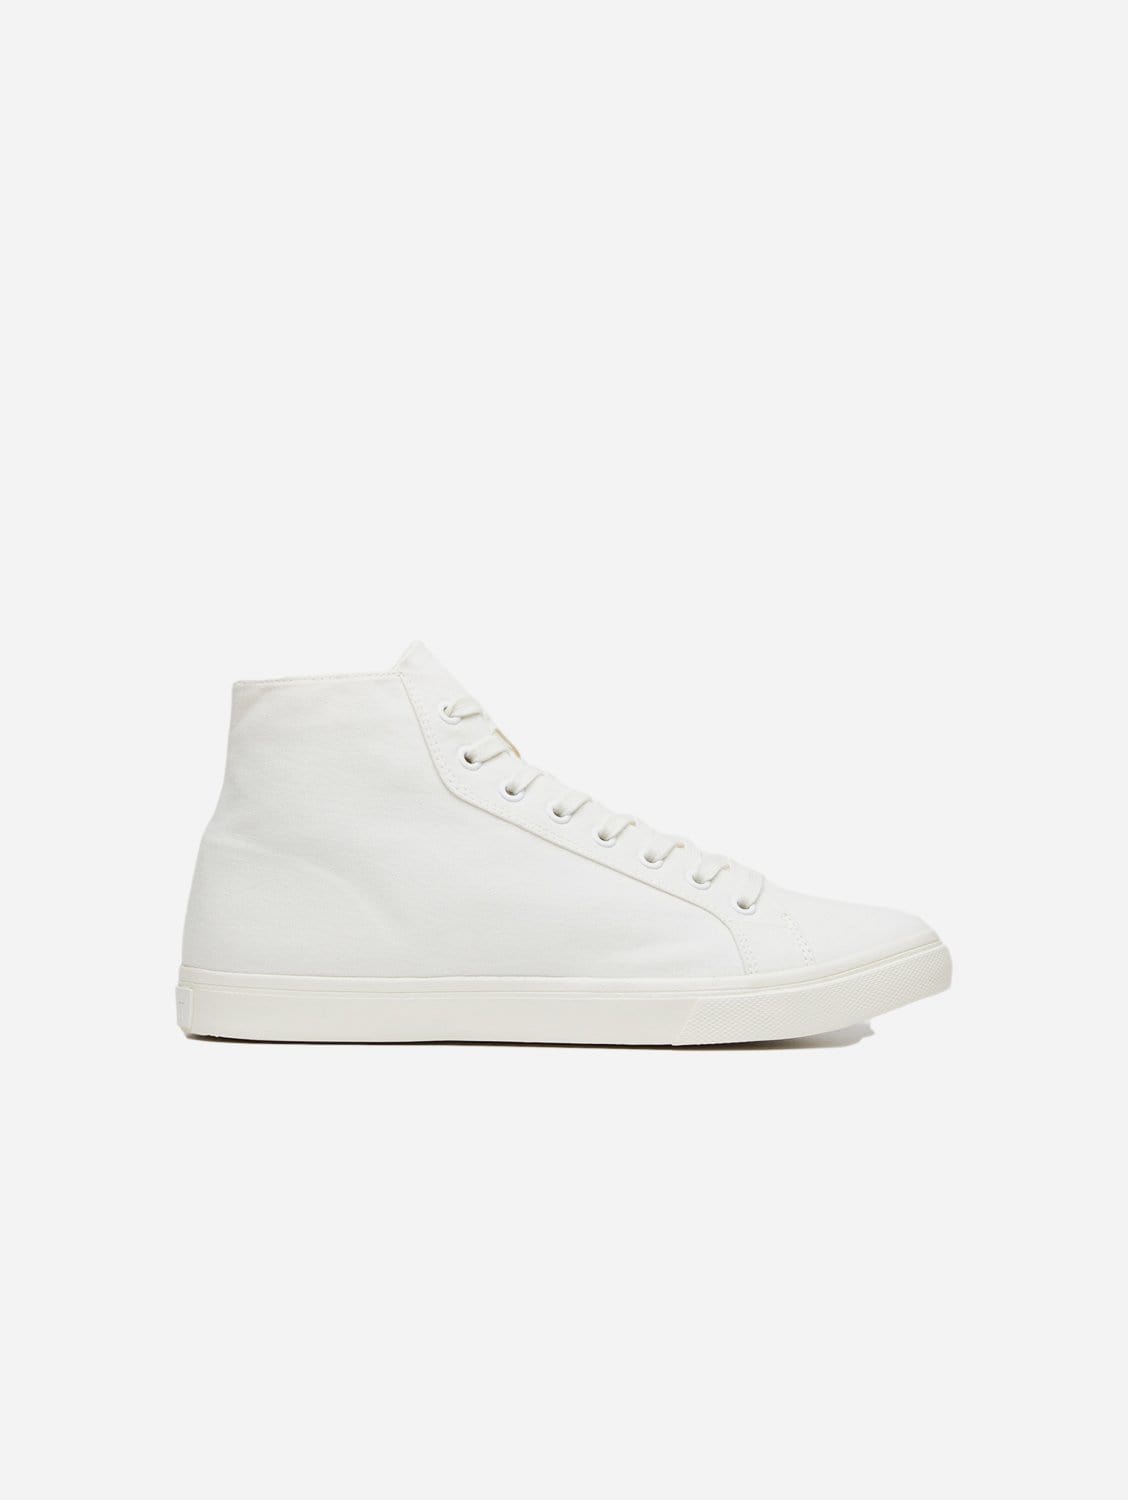 elliott Climate Positive Recycled Canvas High-Top Trainer | White/Stripes